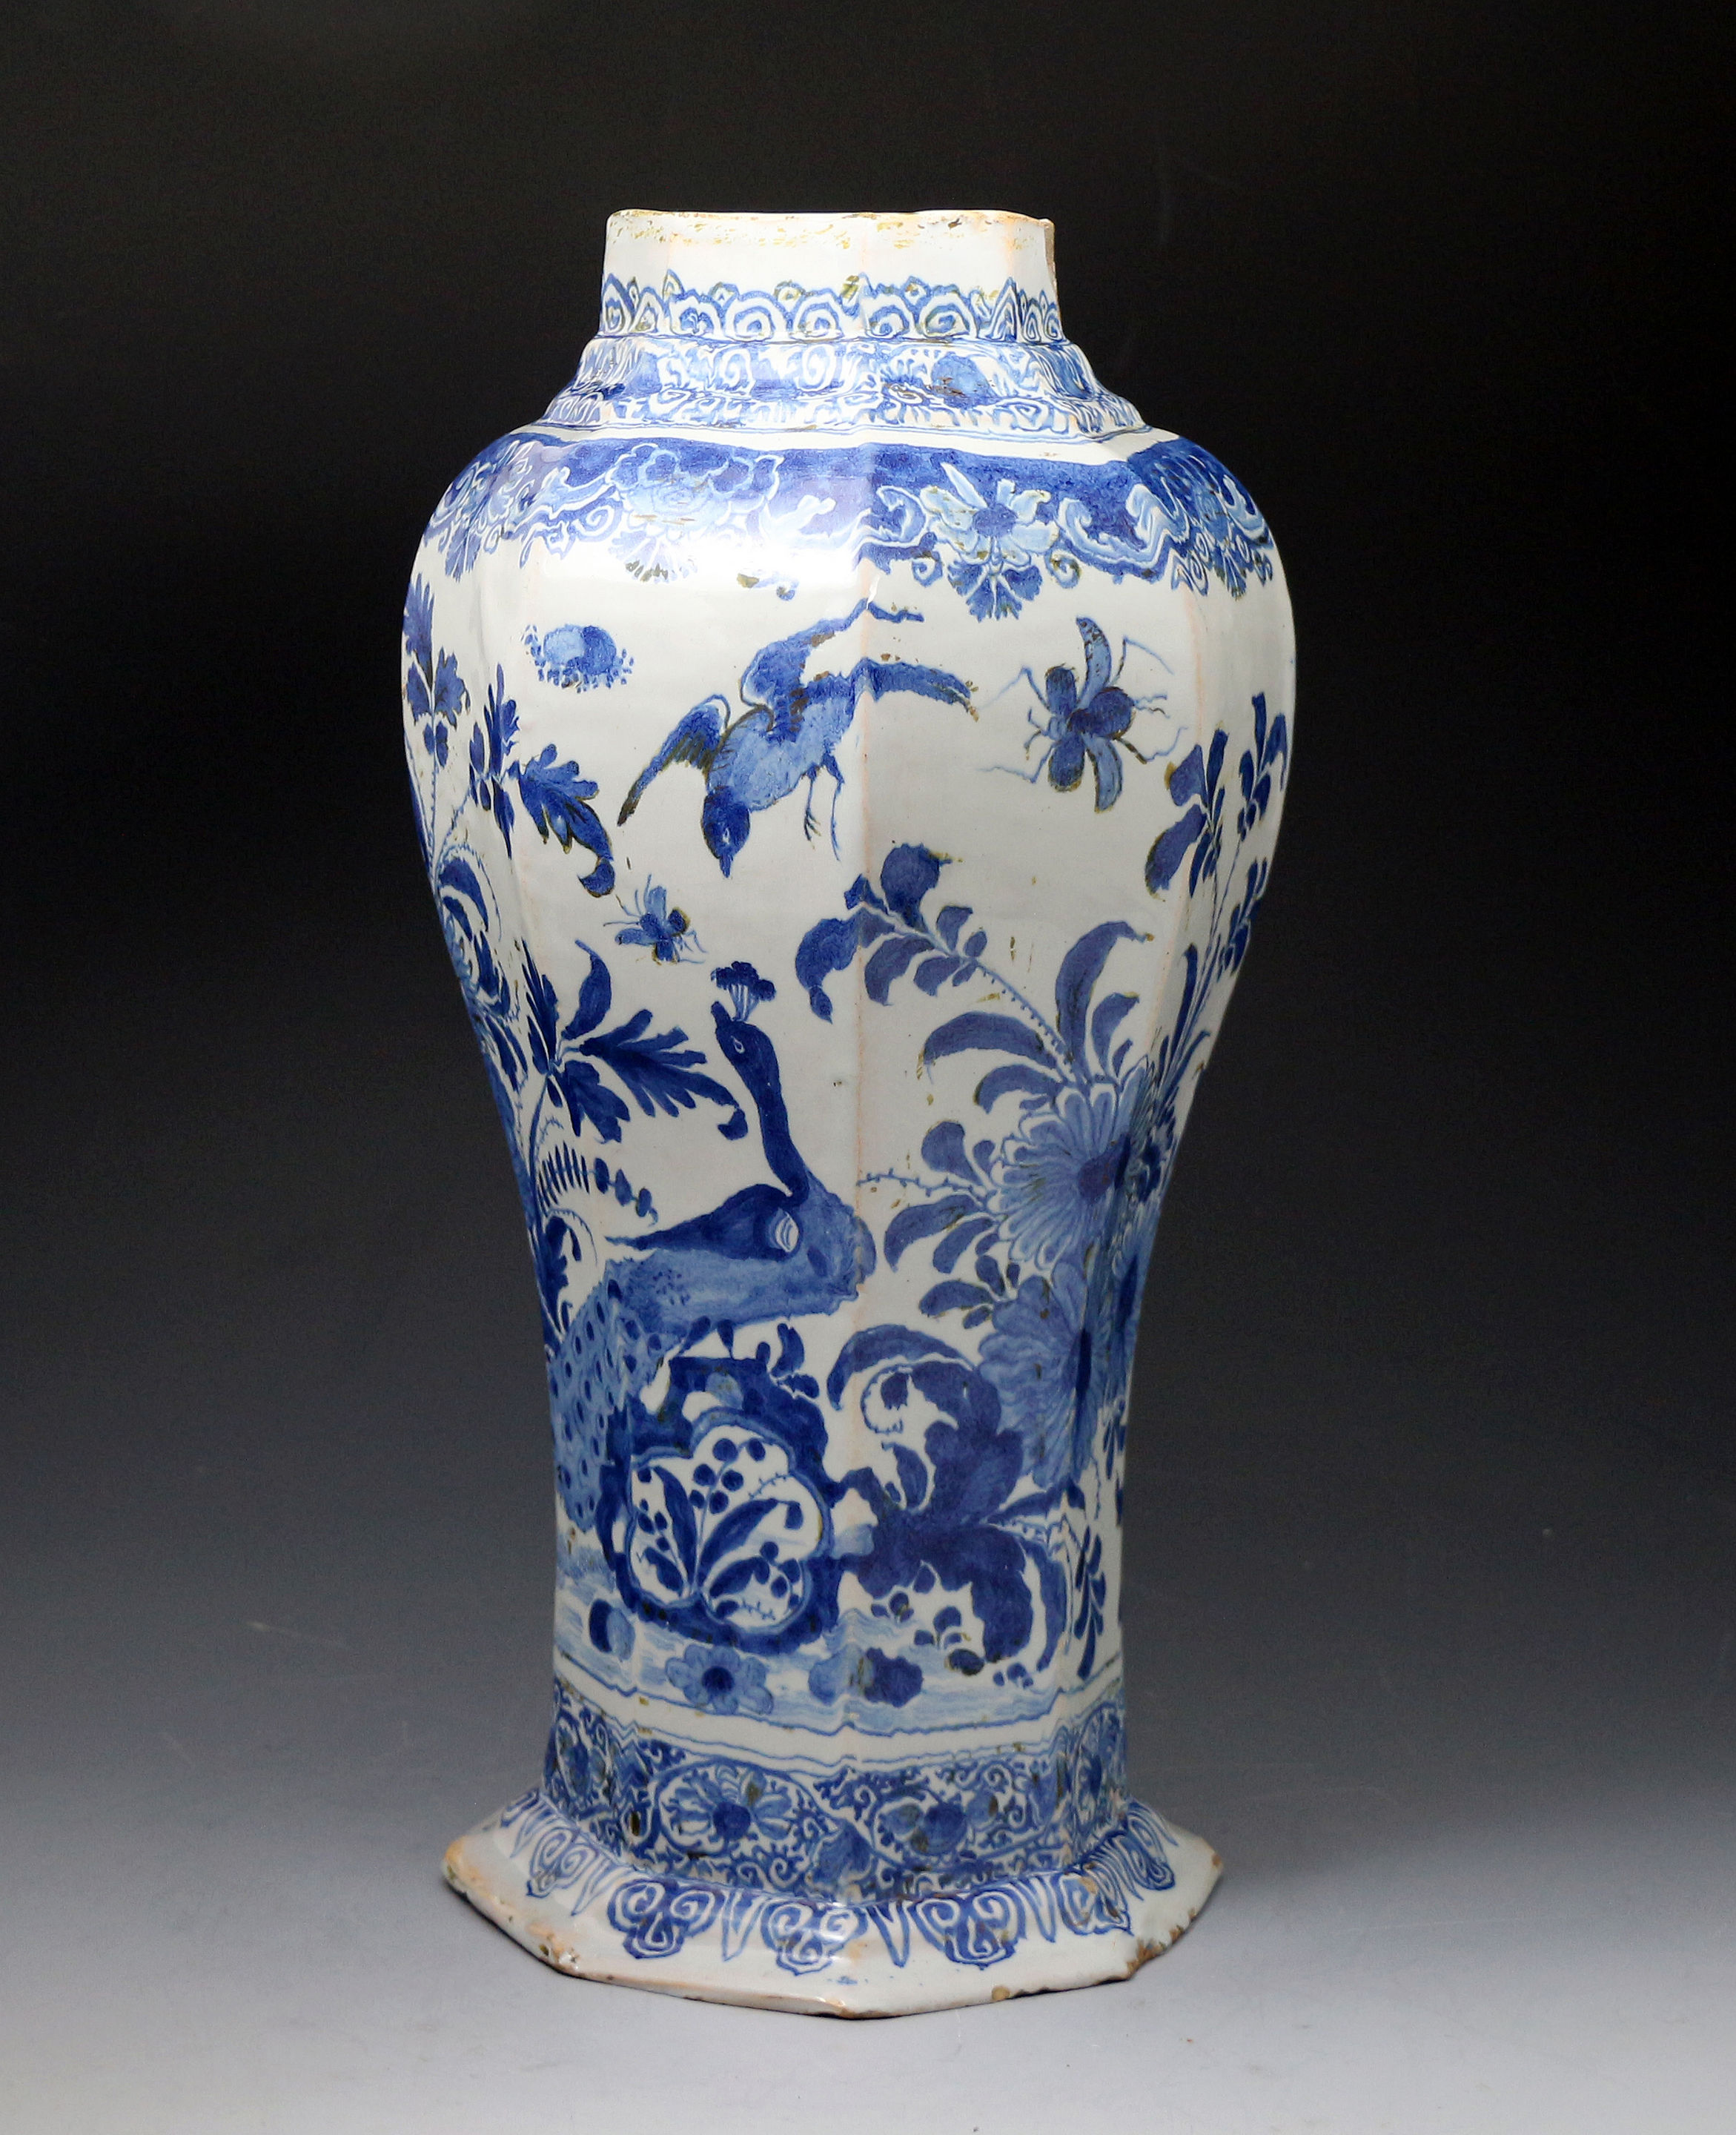 Delftware vase decorated in the Chinese style probably London 